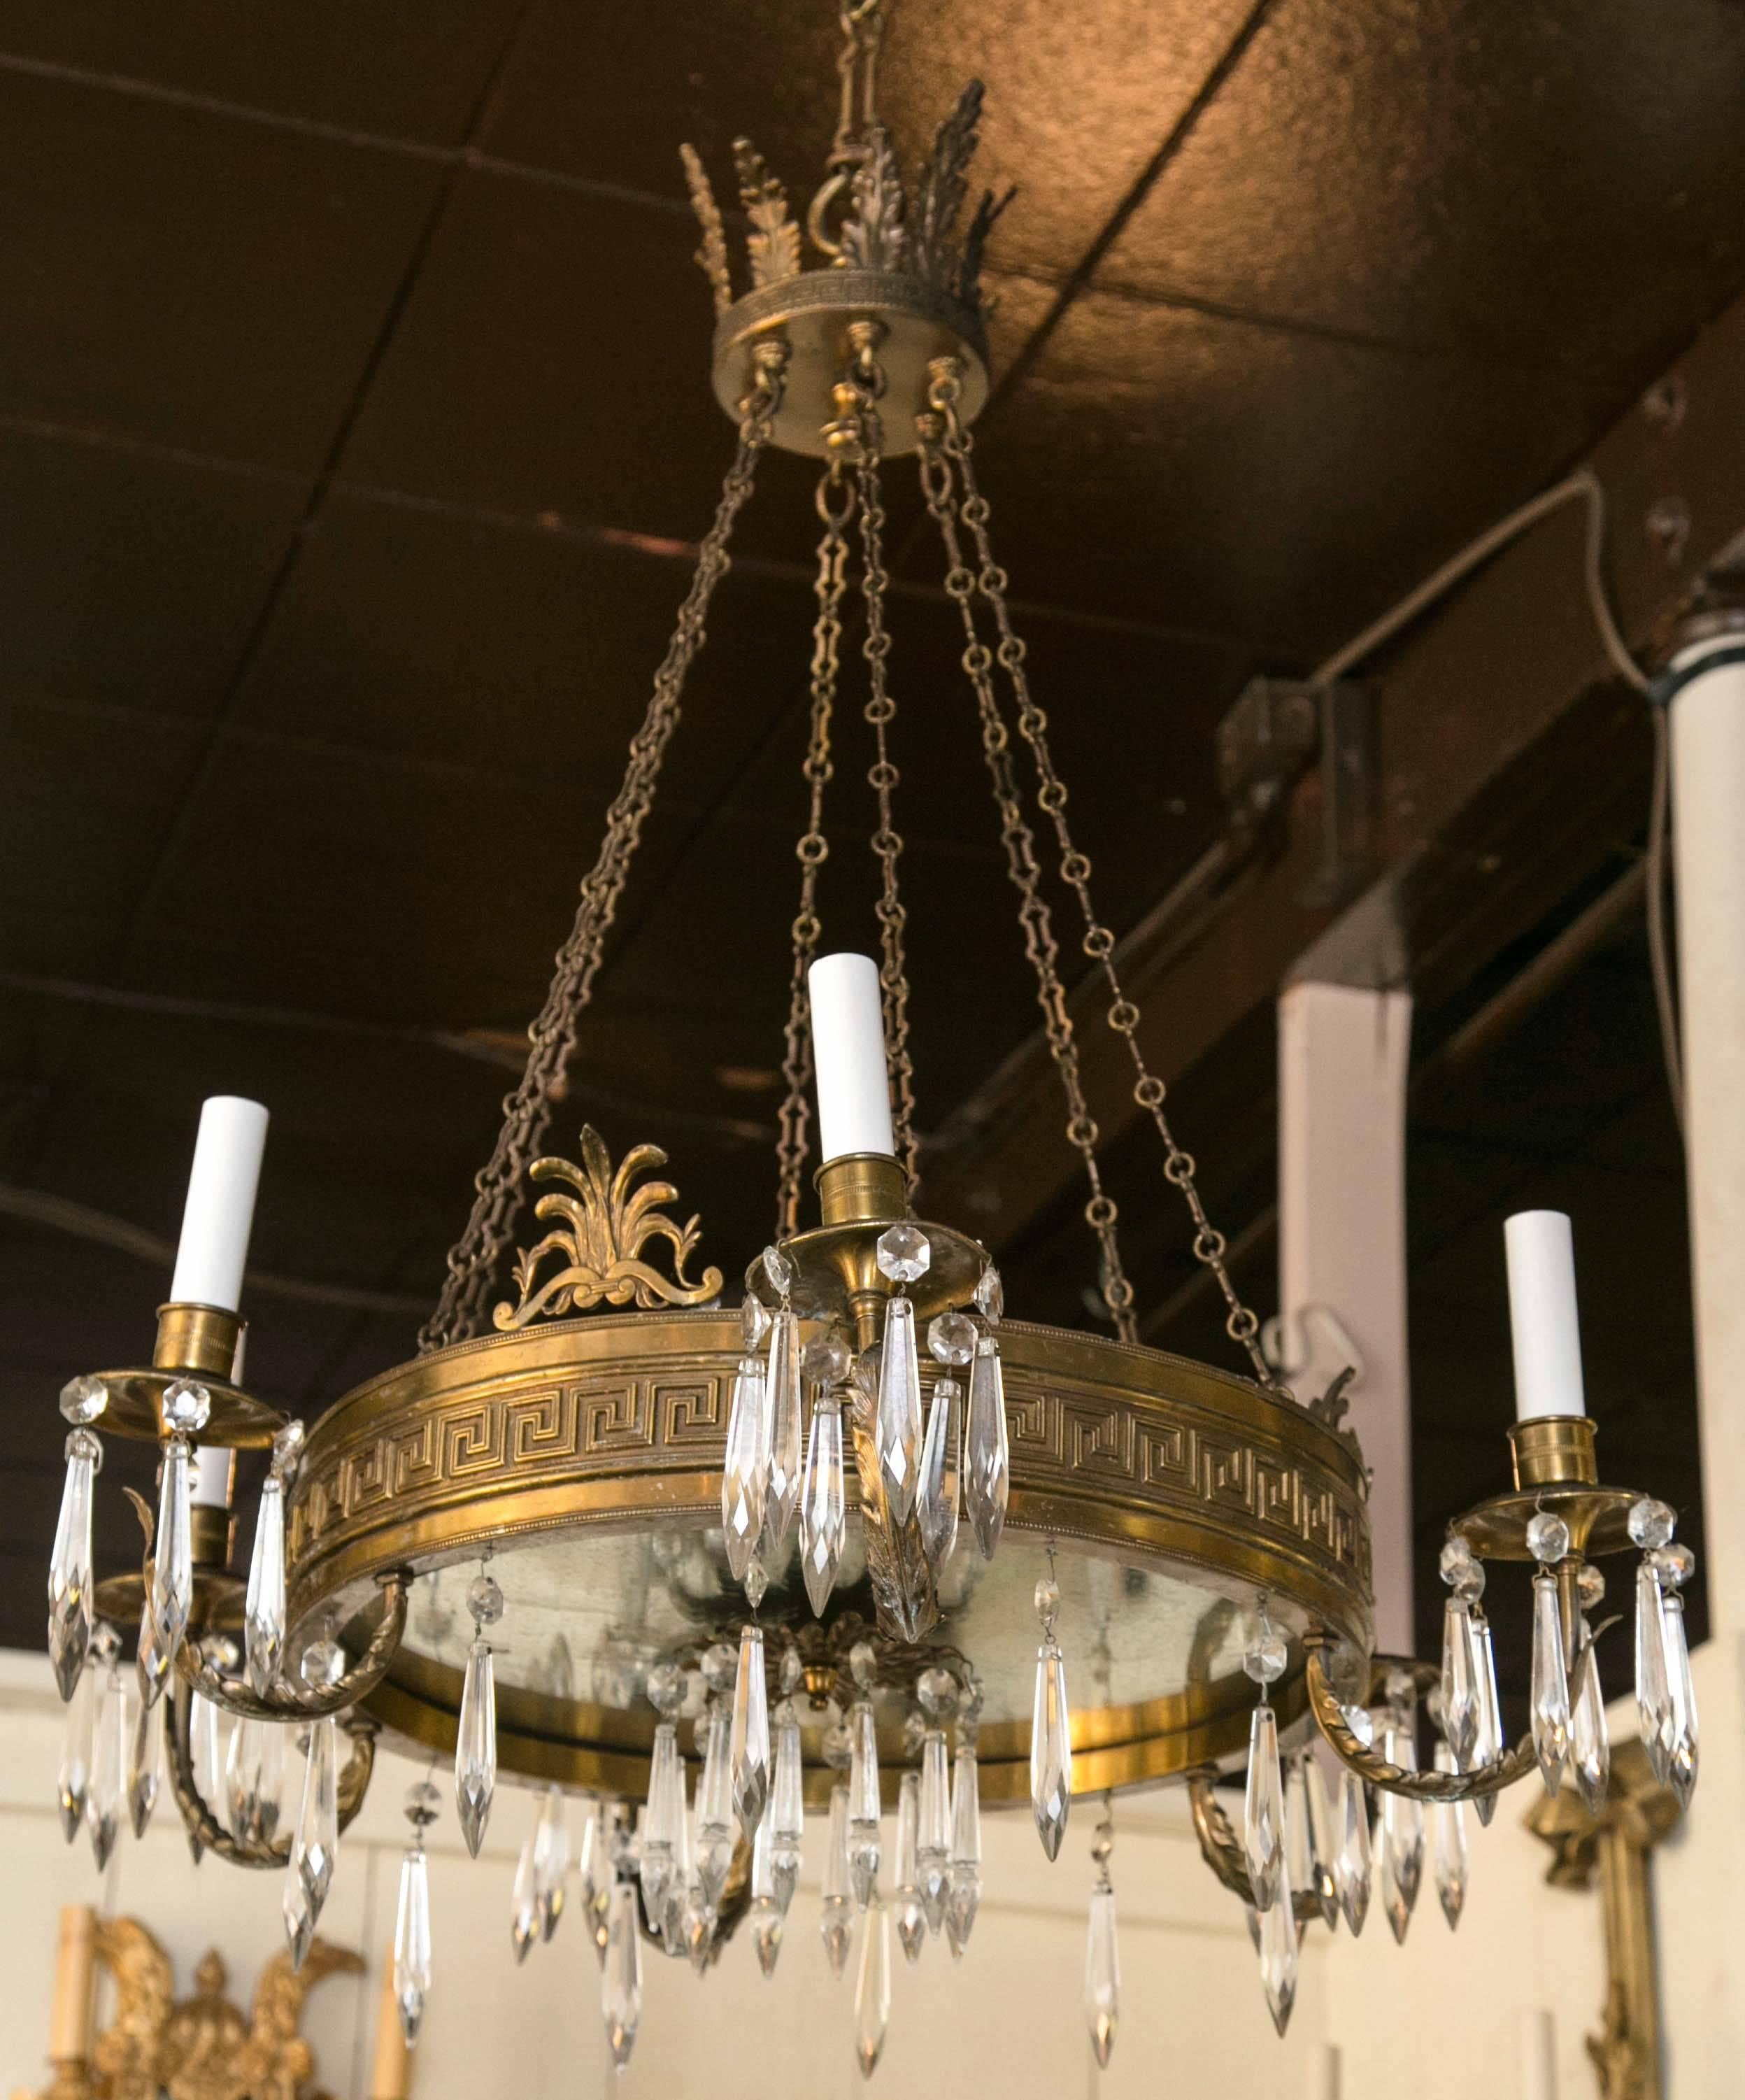 Topped with a crown of acanthus leaves. The six chains connect to a ring of brass decorated with a Greek key motif. Six candle arms and three palmettes attached to the ring. Cut-glass drops hang from the ring, the baubeches, and the central